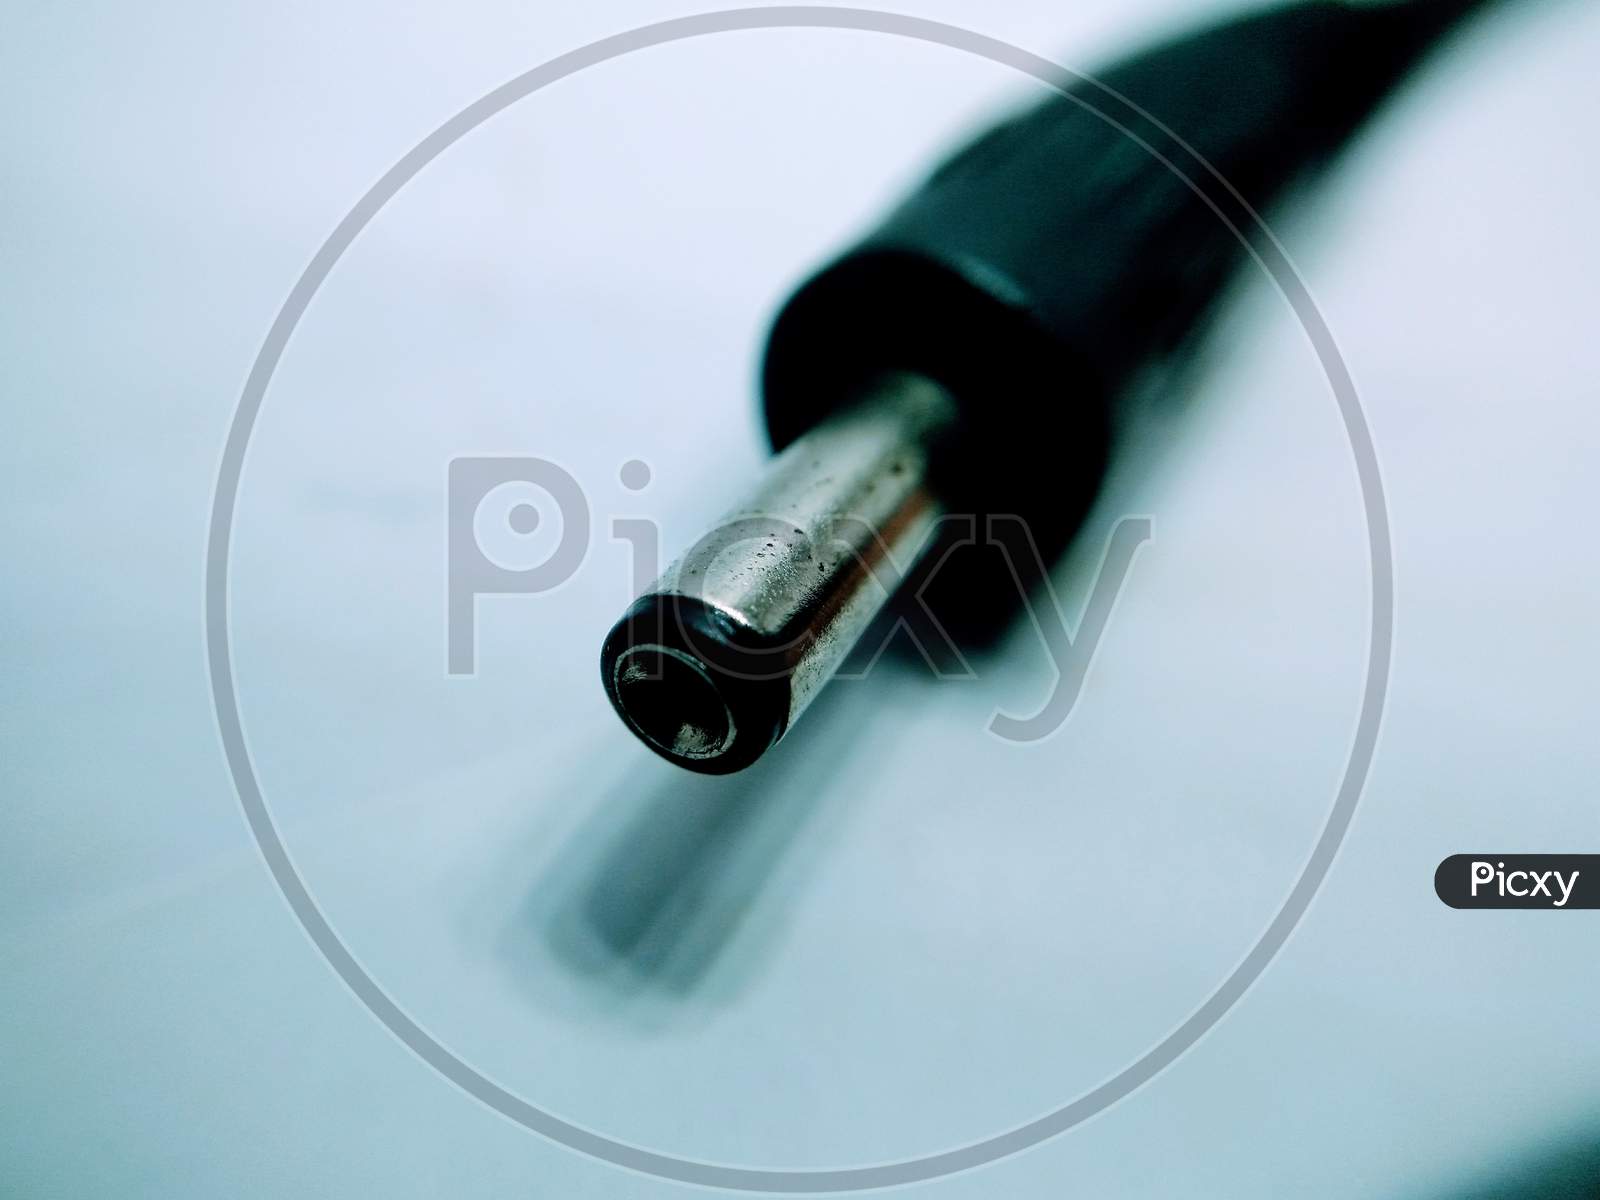 A picture of charging pin